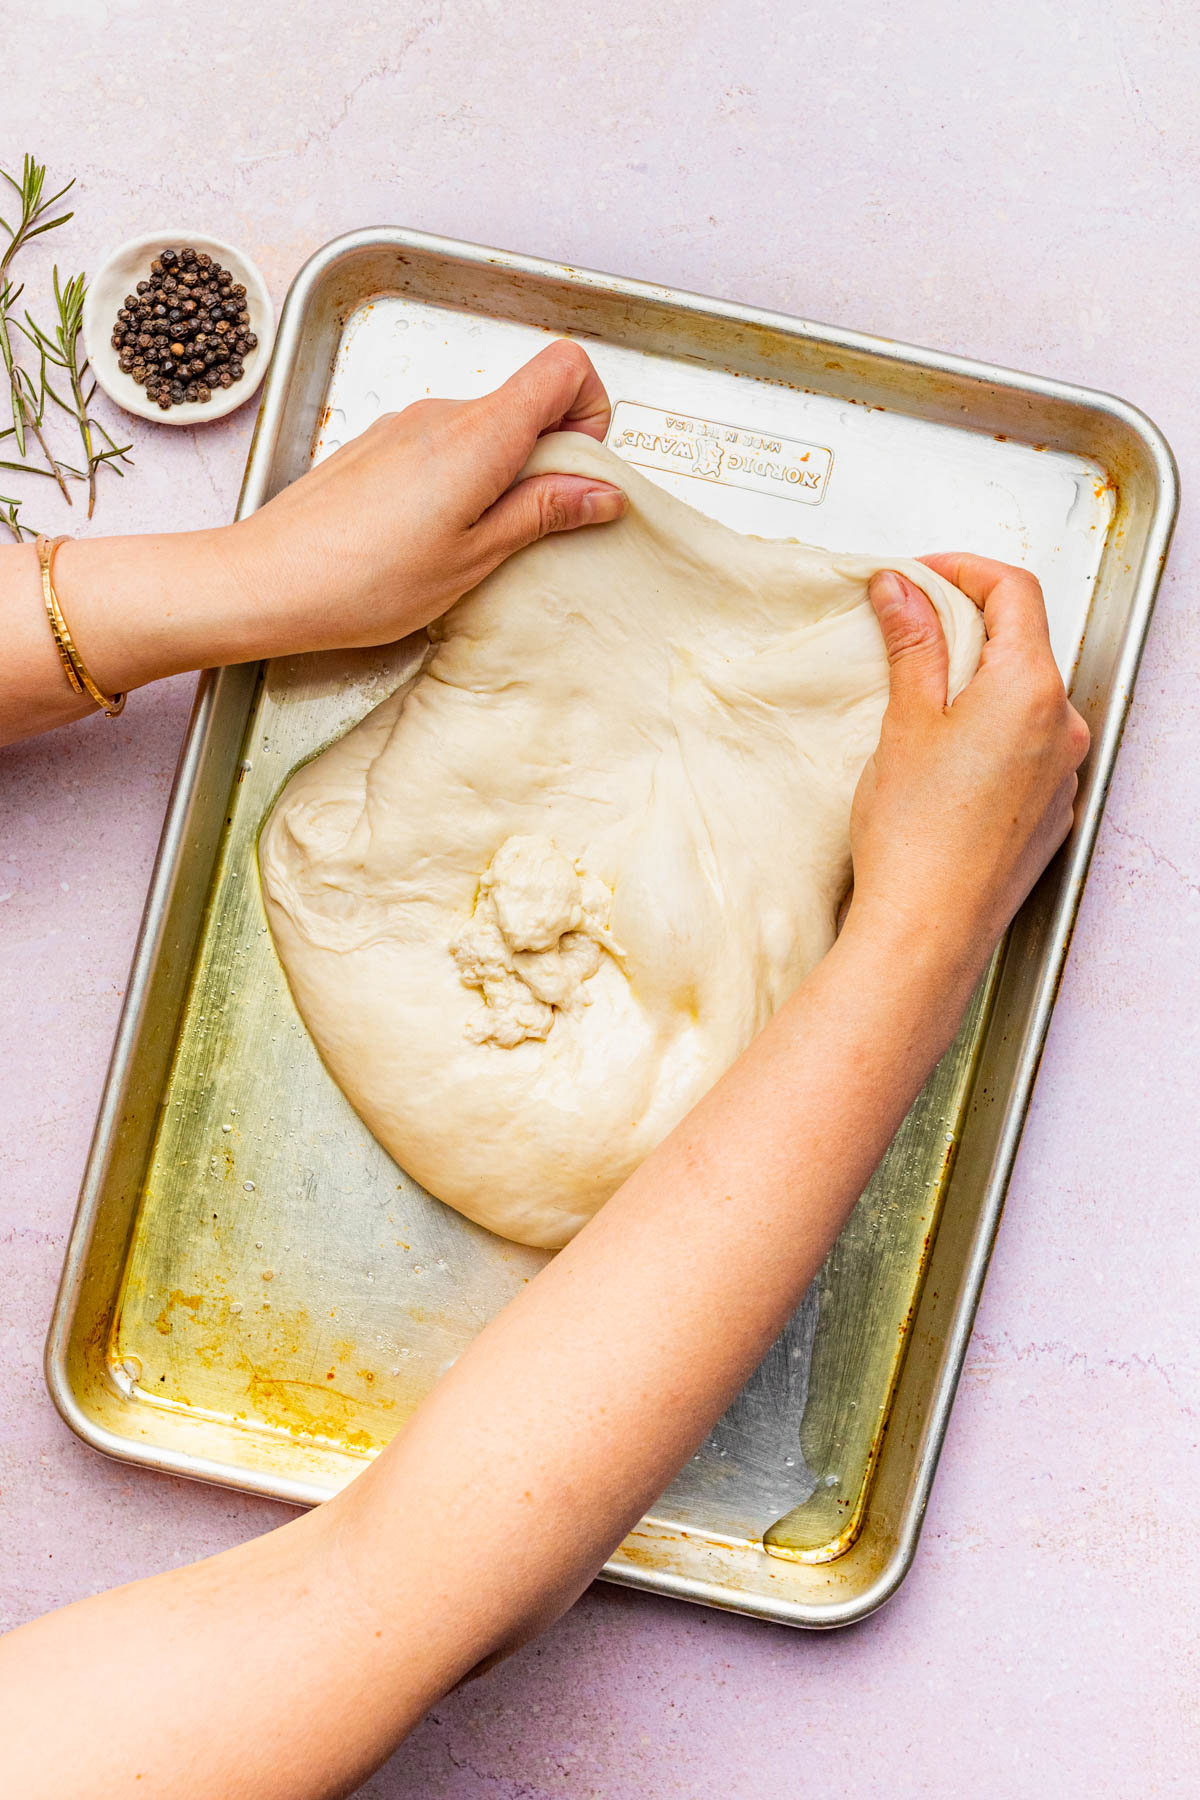 Stretching the dough out.